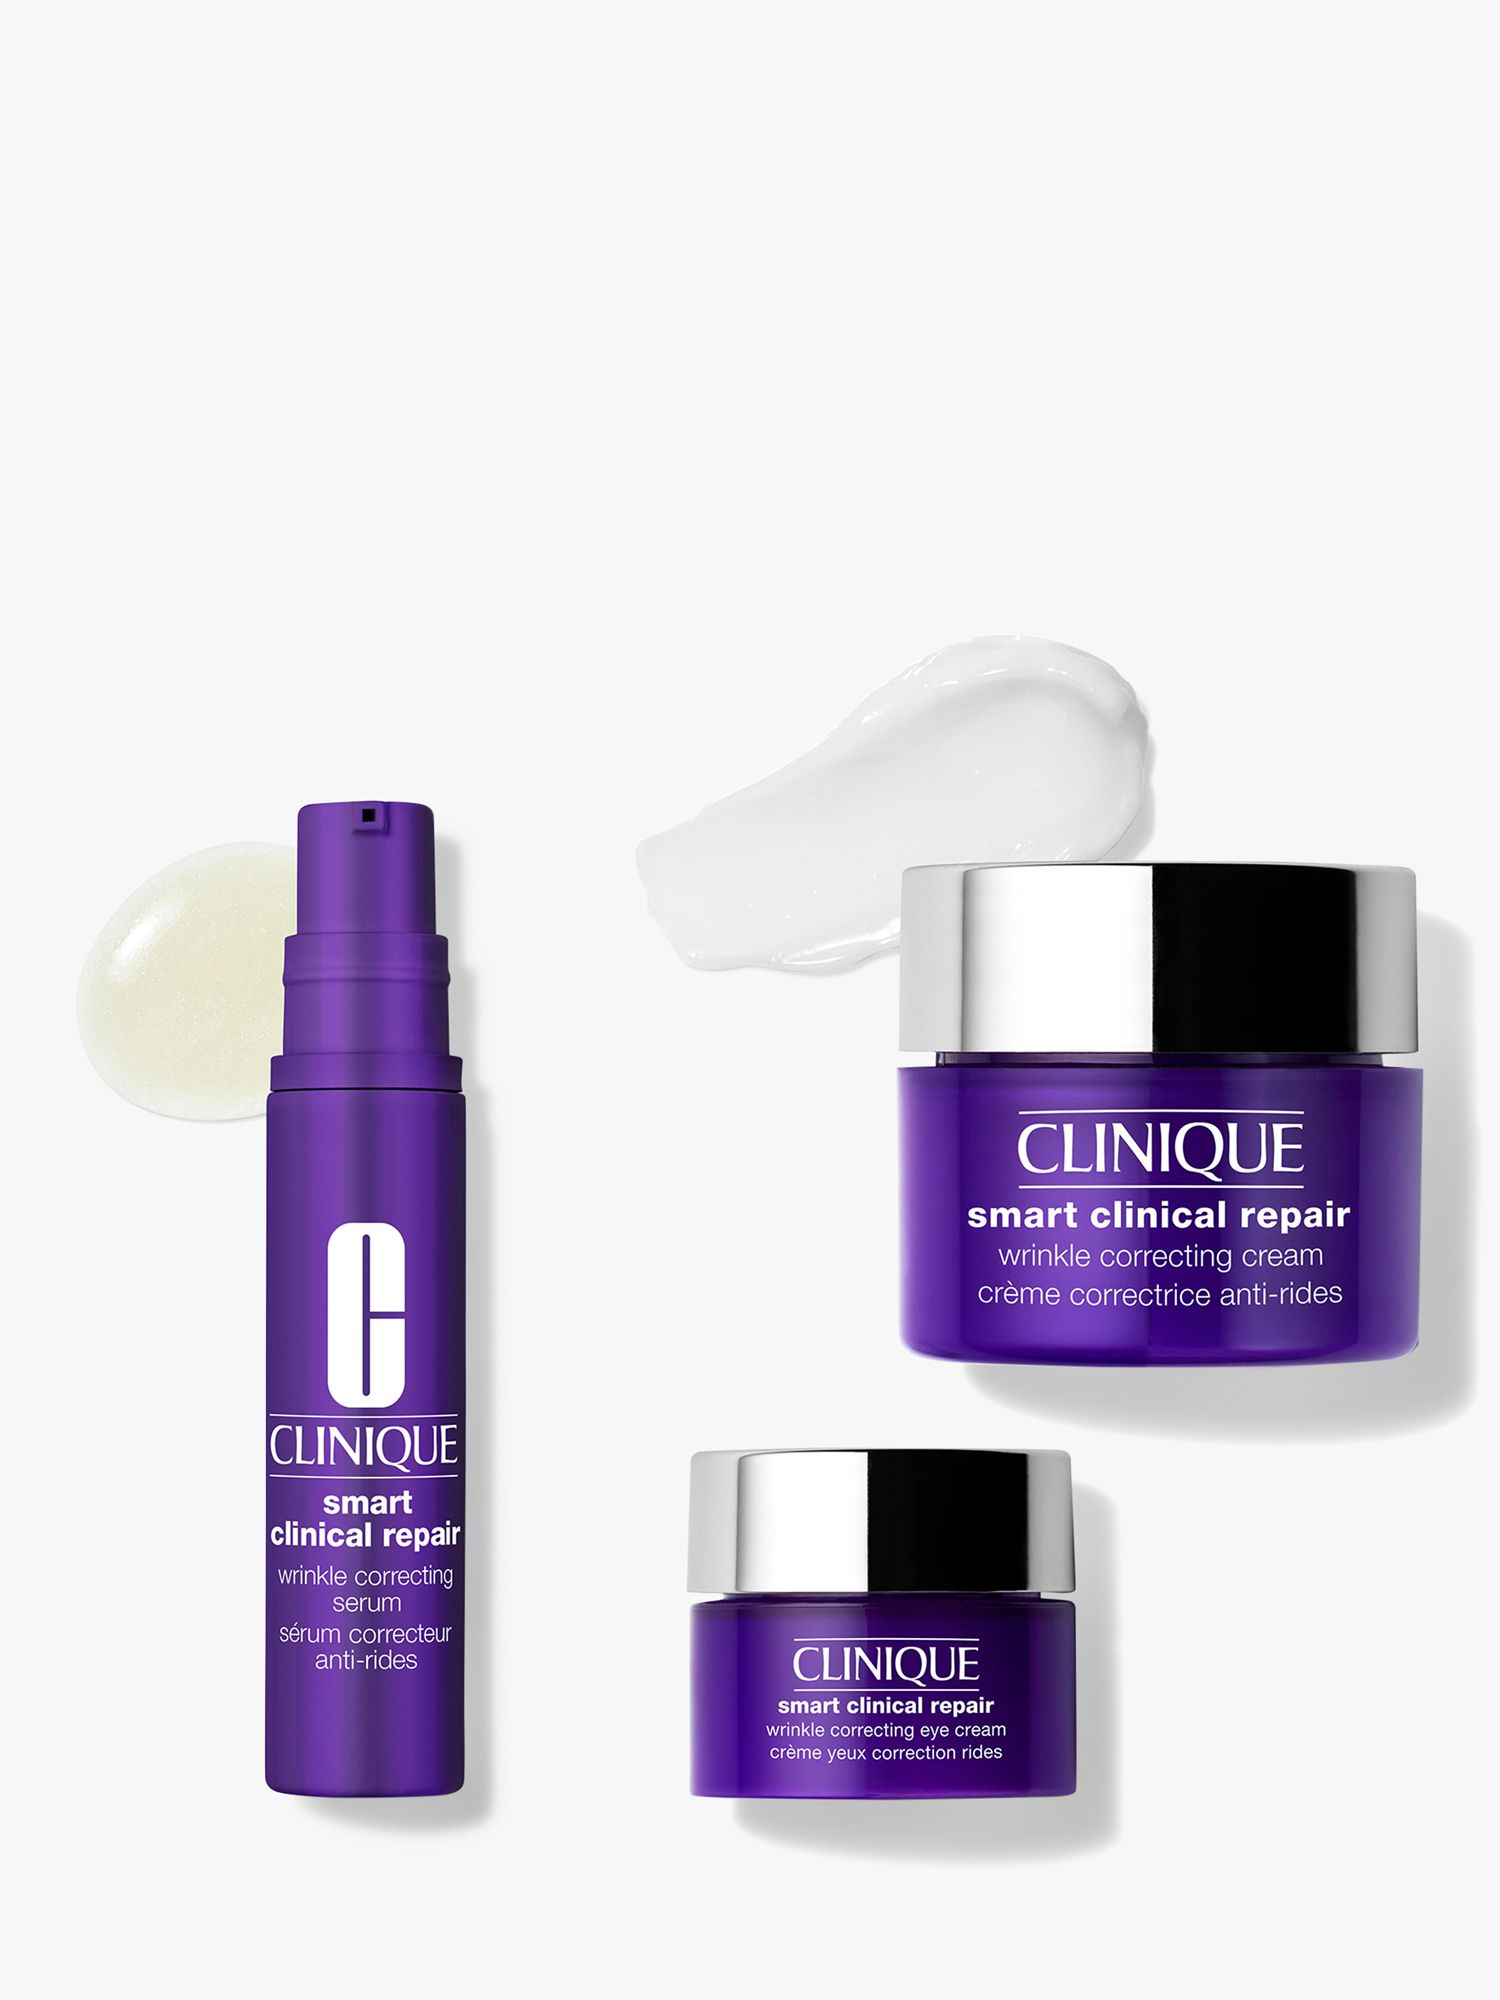 Clinique Skin School Supplies Smooth + Renew Lab Skincare Gift Set